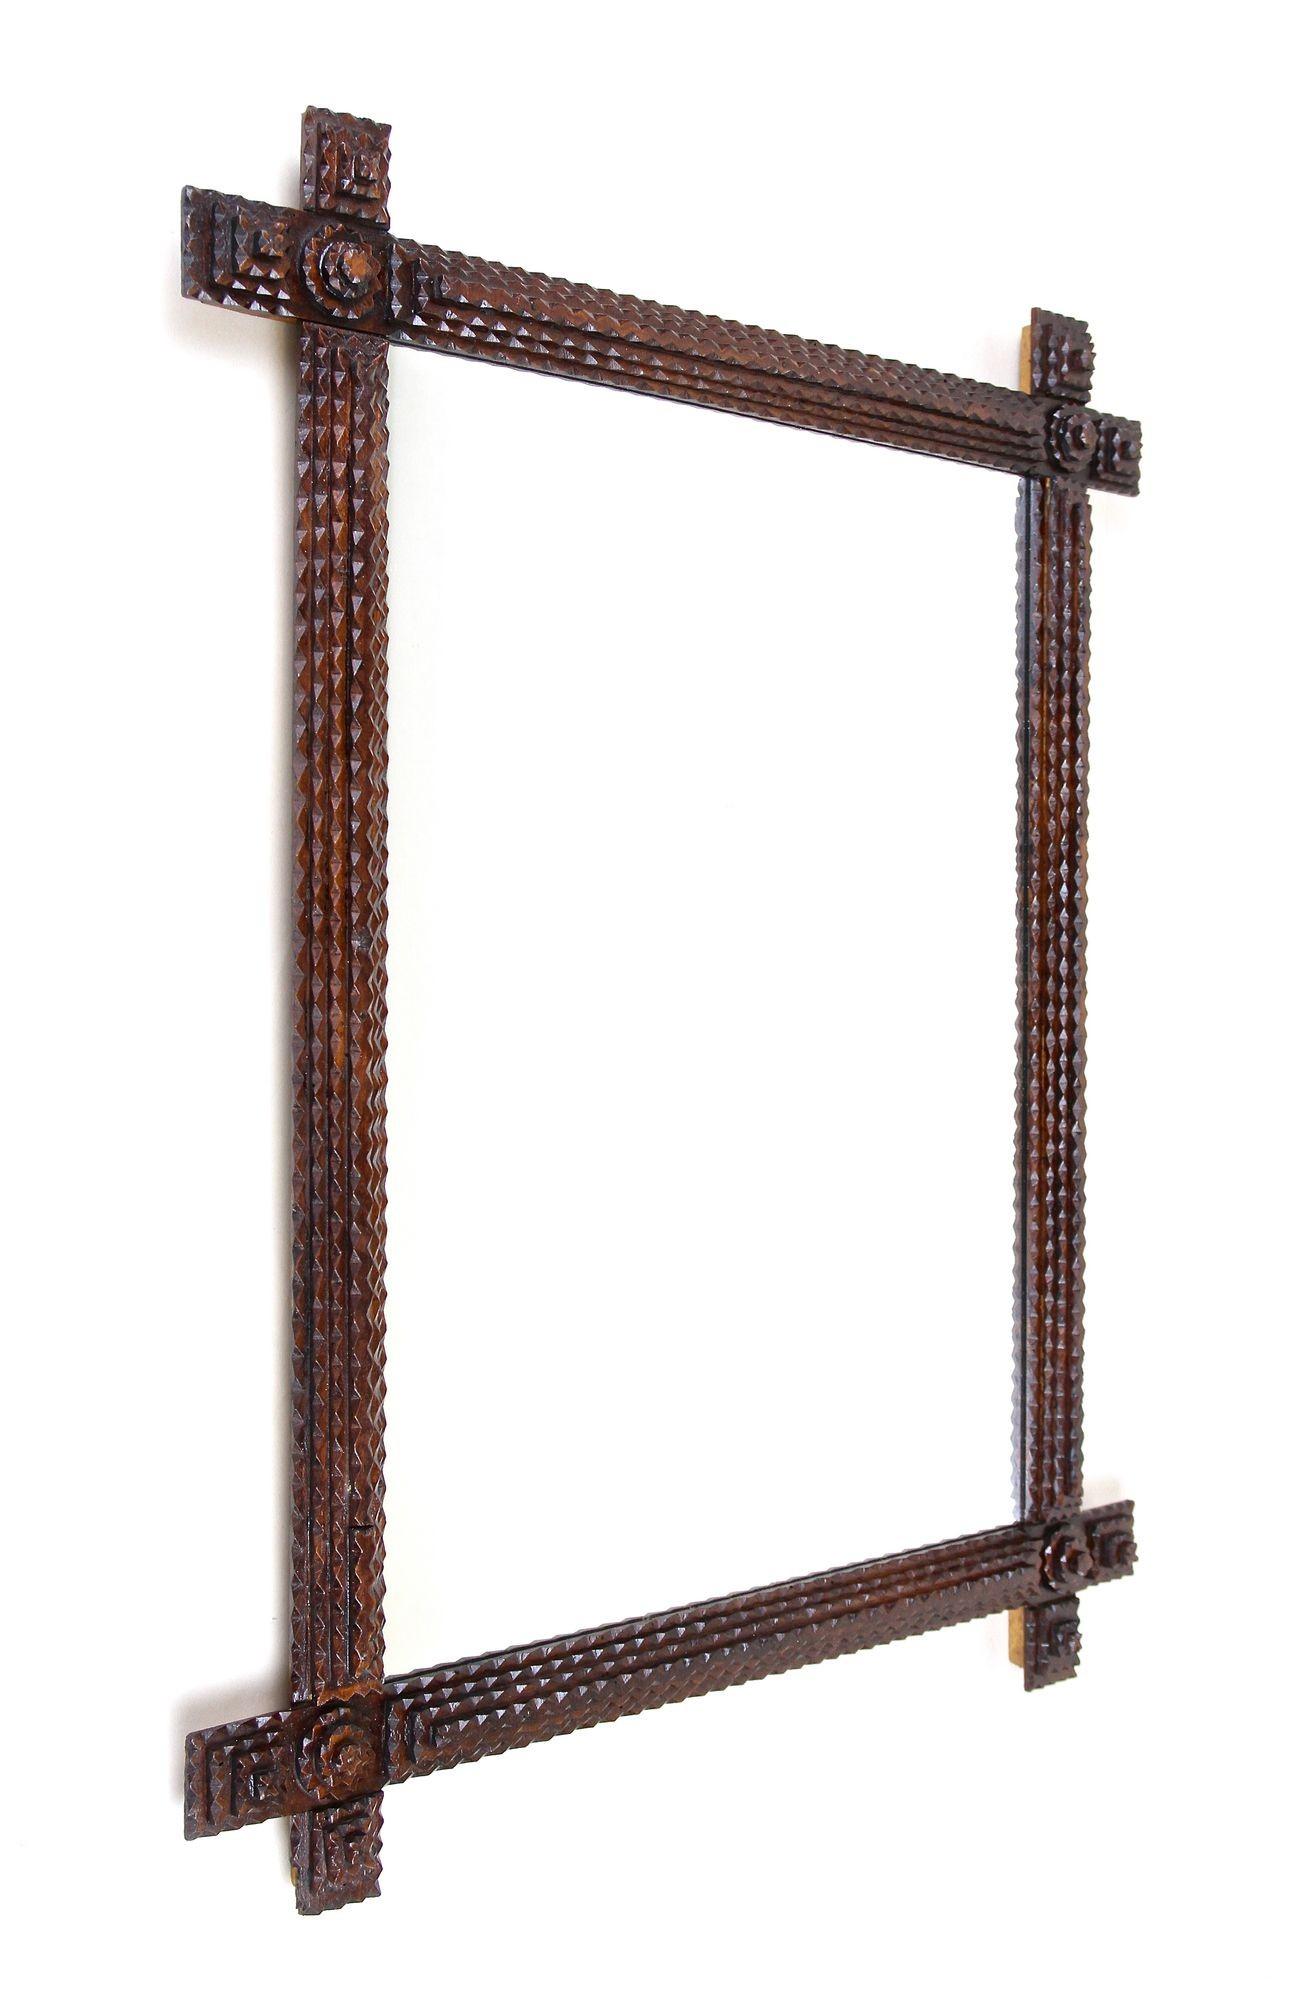 Unique handcarved Tramp Art Wall Mirror from the late 19th century in Austria. Artfully crafted around 1880, this extraordinary rustic wall mirror impresses with its extraordinary notch cut design and slightly protruding corners. The exceptional